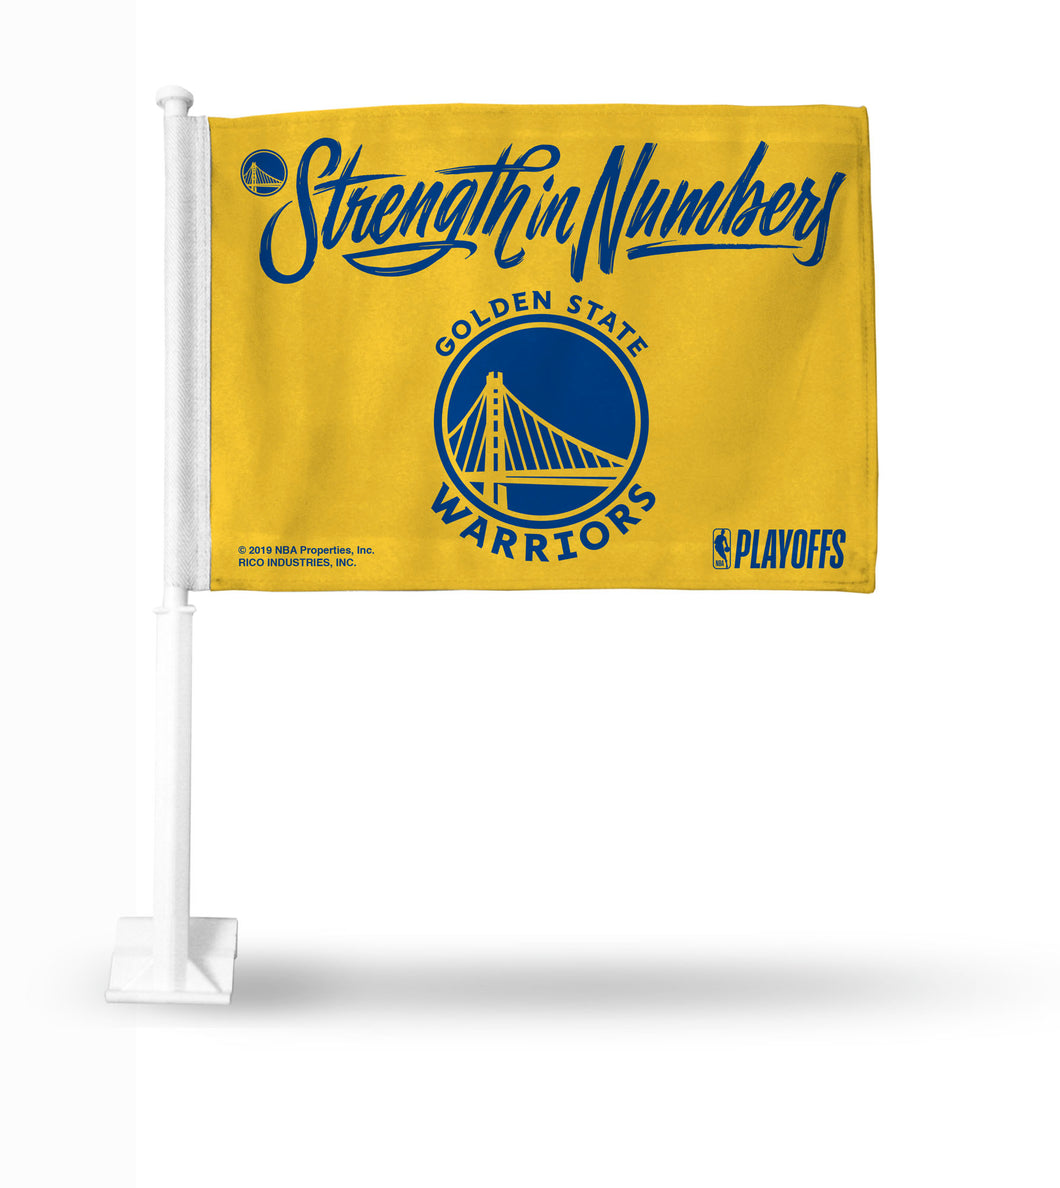 WARRIORS - STRENGTH IN NUMBERS - YELLOW CAR FLAG